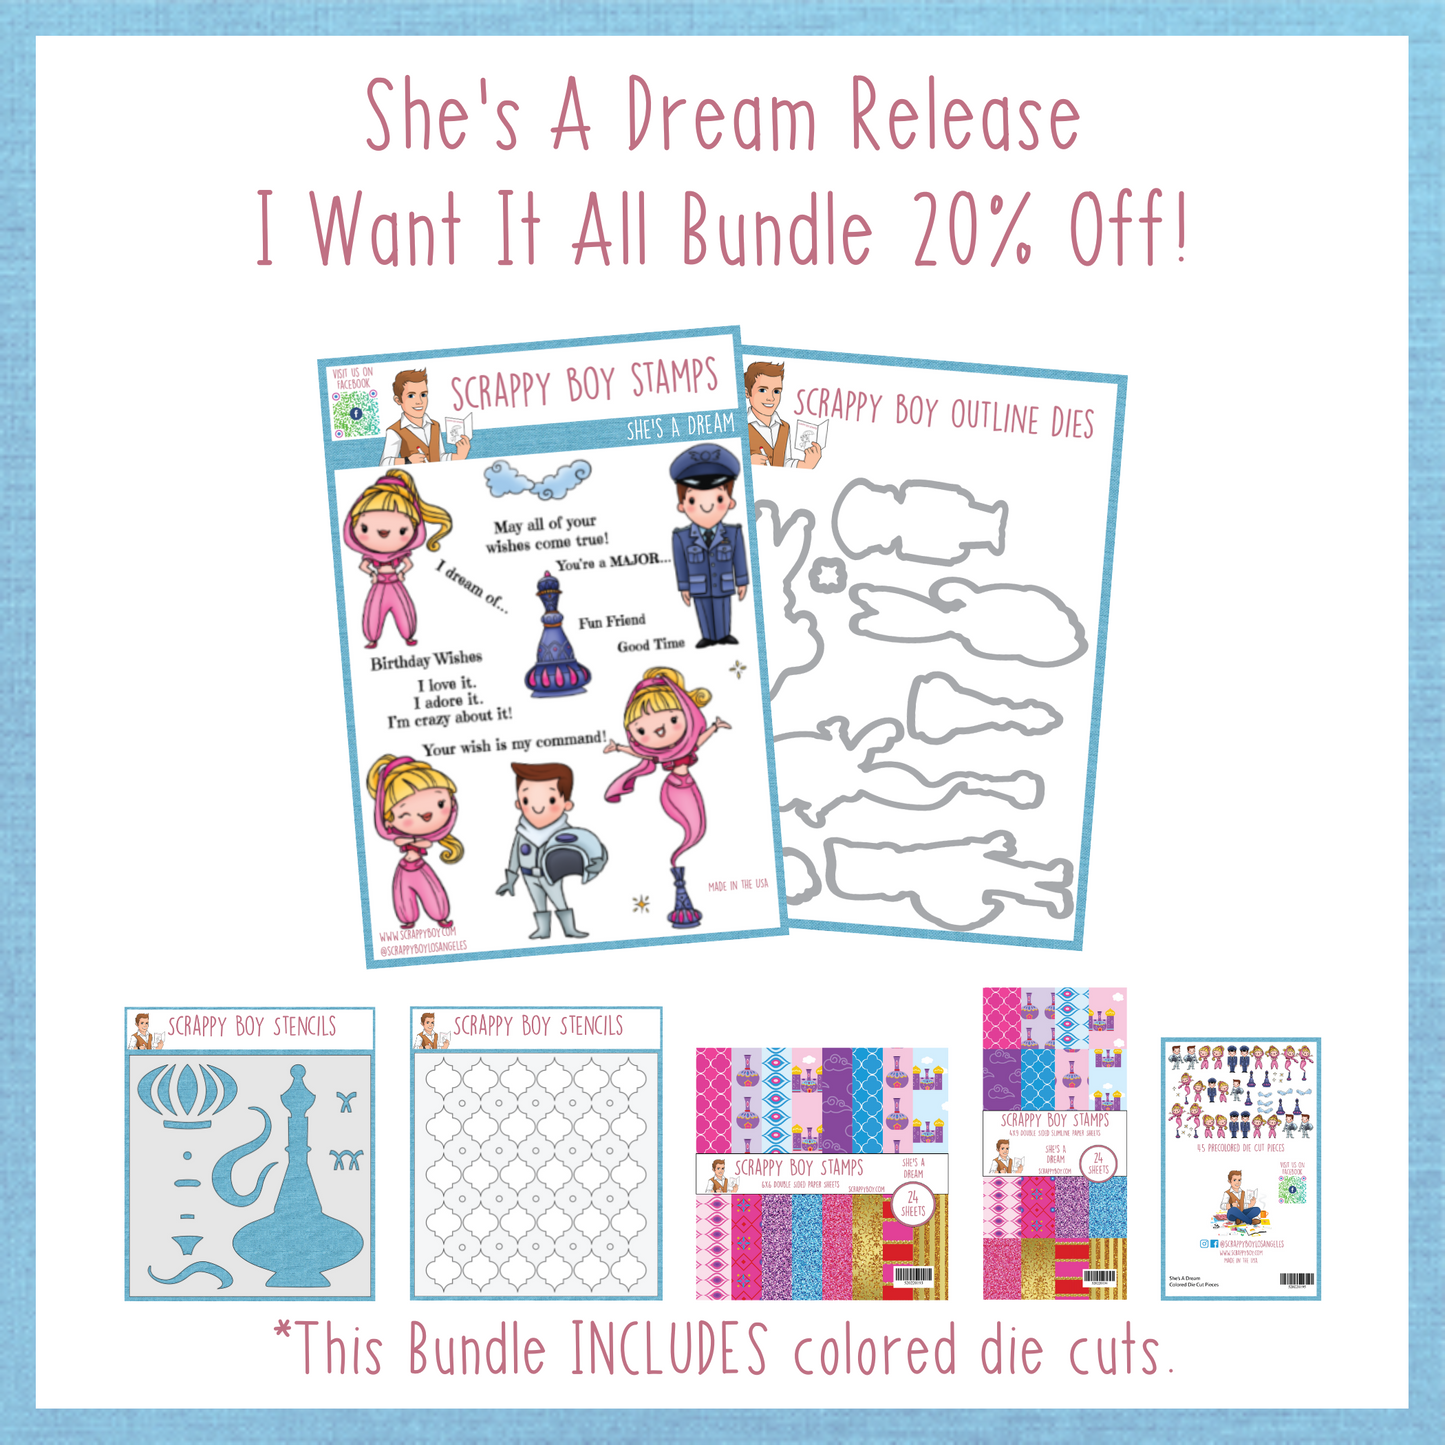 I Want It All Bundle - She's A Dream Release Scrappy Boy Stamps